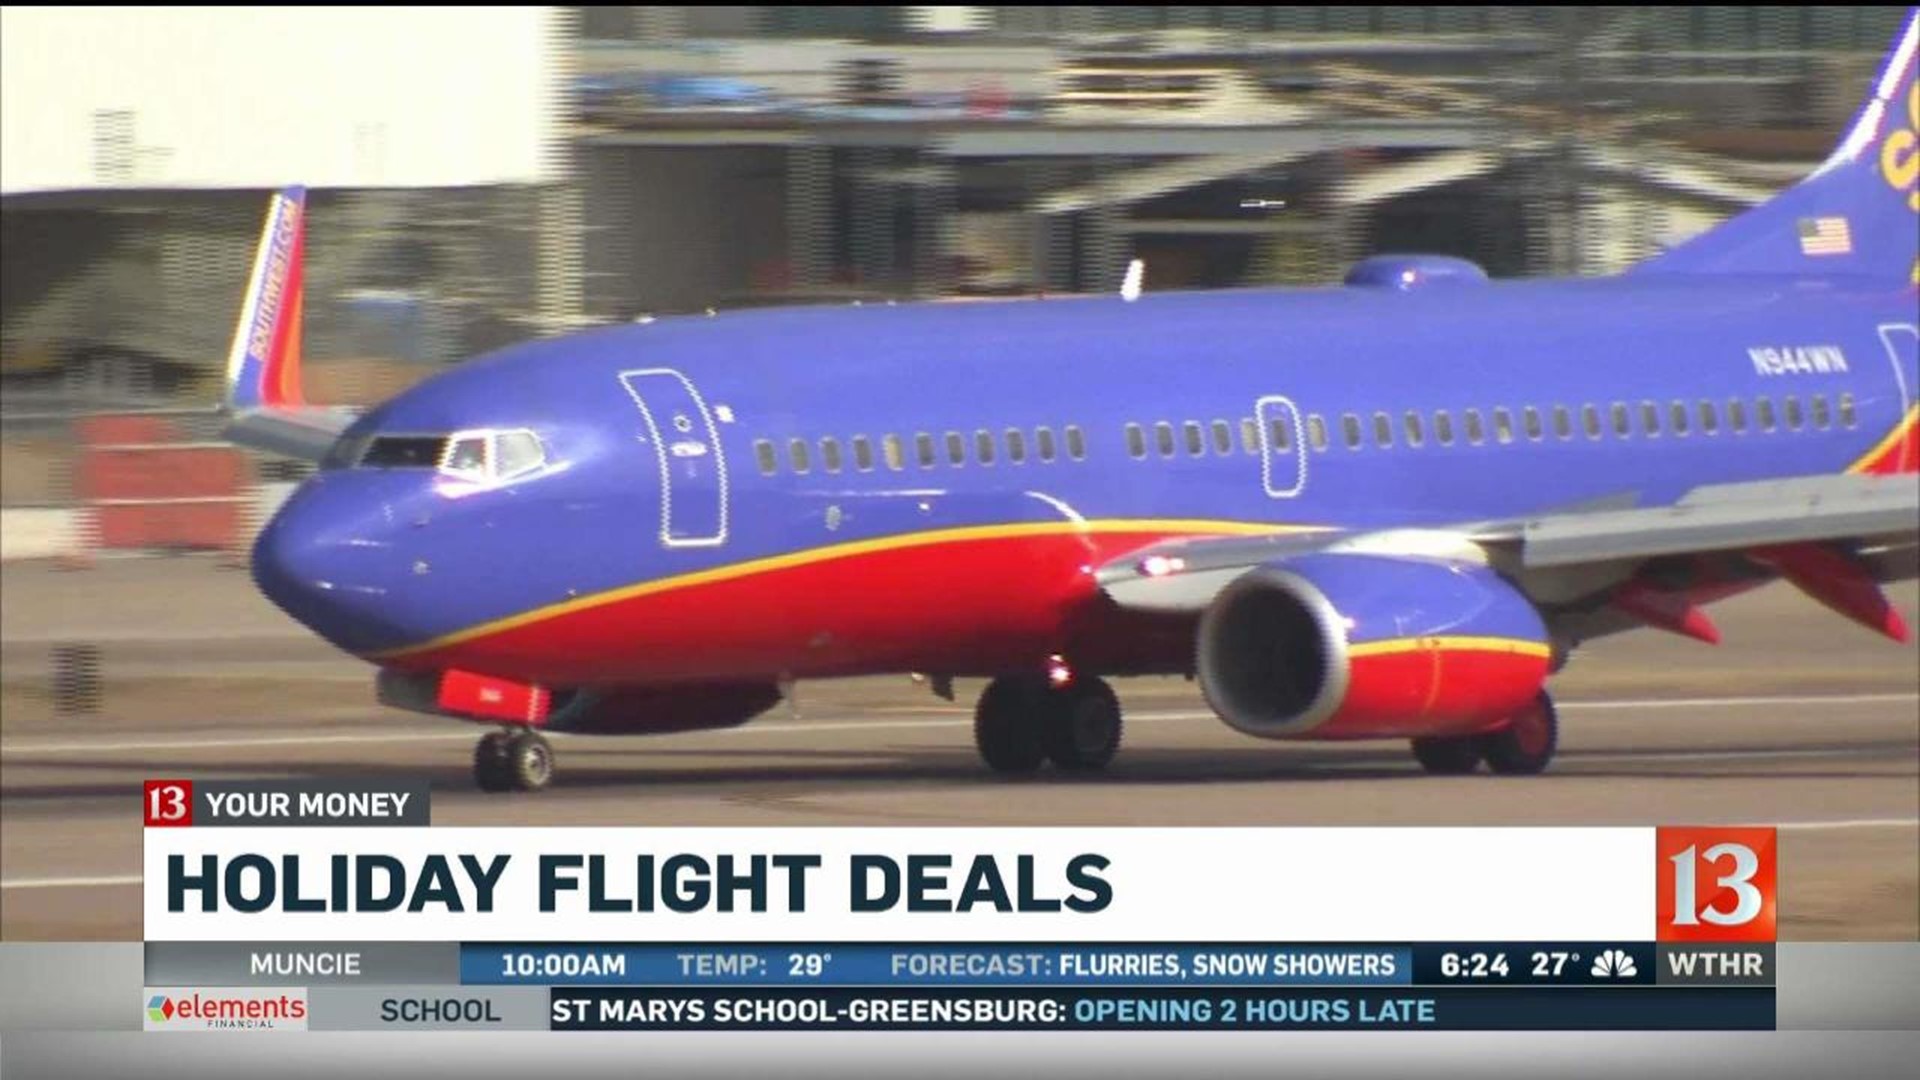 Southwest Airlines launching new deals on holiday flights